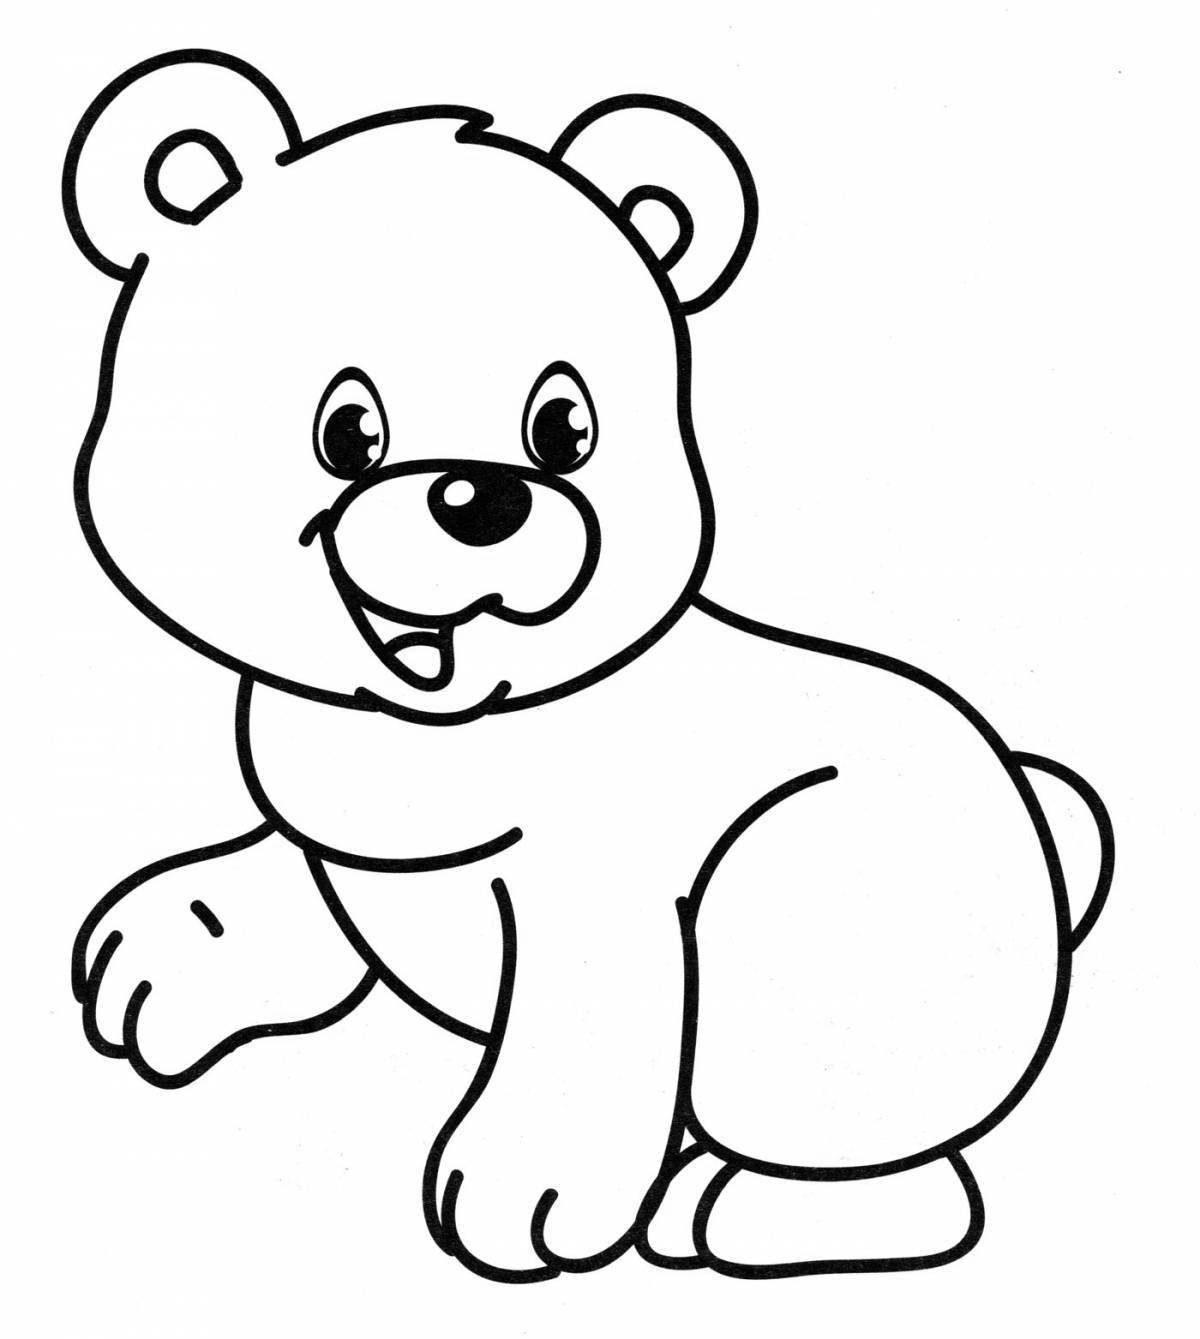 Coloring book smart bear for kids